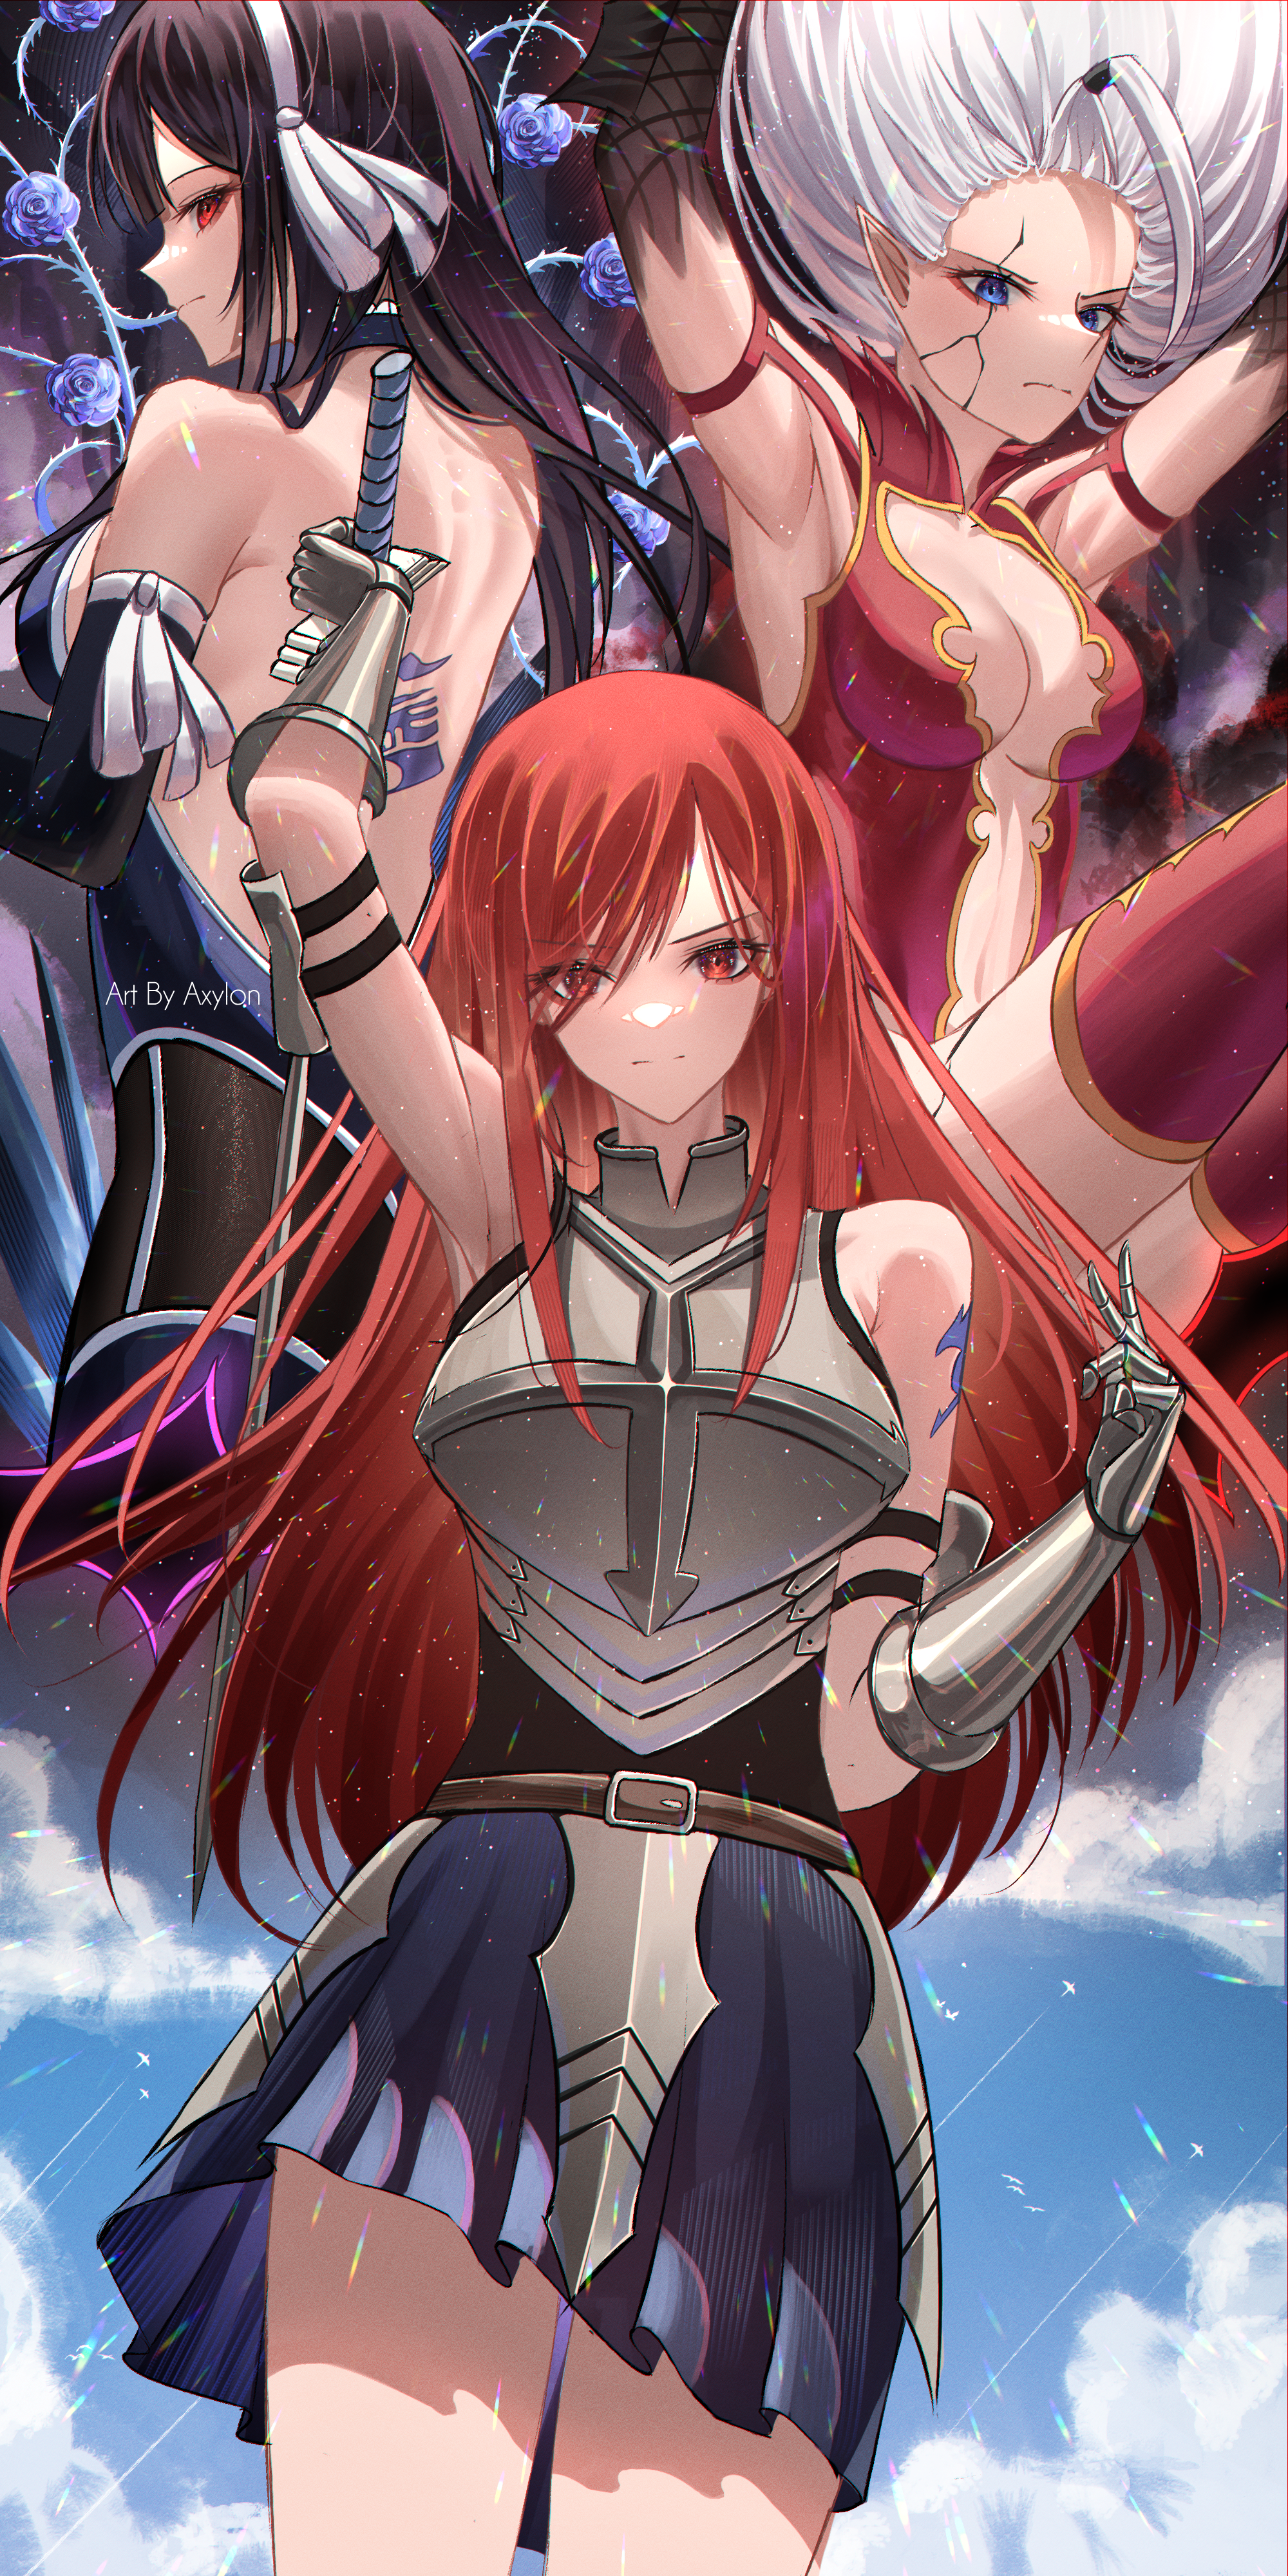 101222, Erza Scarlet (Fairy Tail), Mirajane Strauss (Fairy Tail), Ultear Milkovich (Fairy Tail), Armor, Armpit, Big Breasts, Black Hair, Brown Eyes, Closed Mouth, Female, Floating, Floating Hair, Gauntlets, Headband, Holding Sword, Holding Weapon, Long Hair, Looking At Viewer, Red Hair, Skirt, Straight Hair, Sword, Tattoo, Three Girls, Trio, Weapon, White Hair